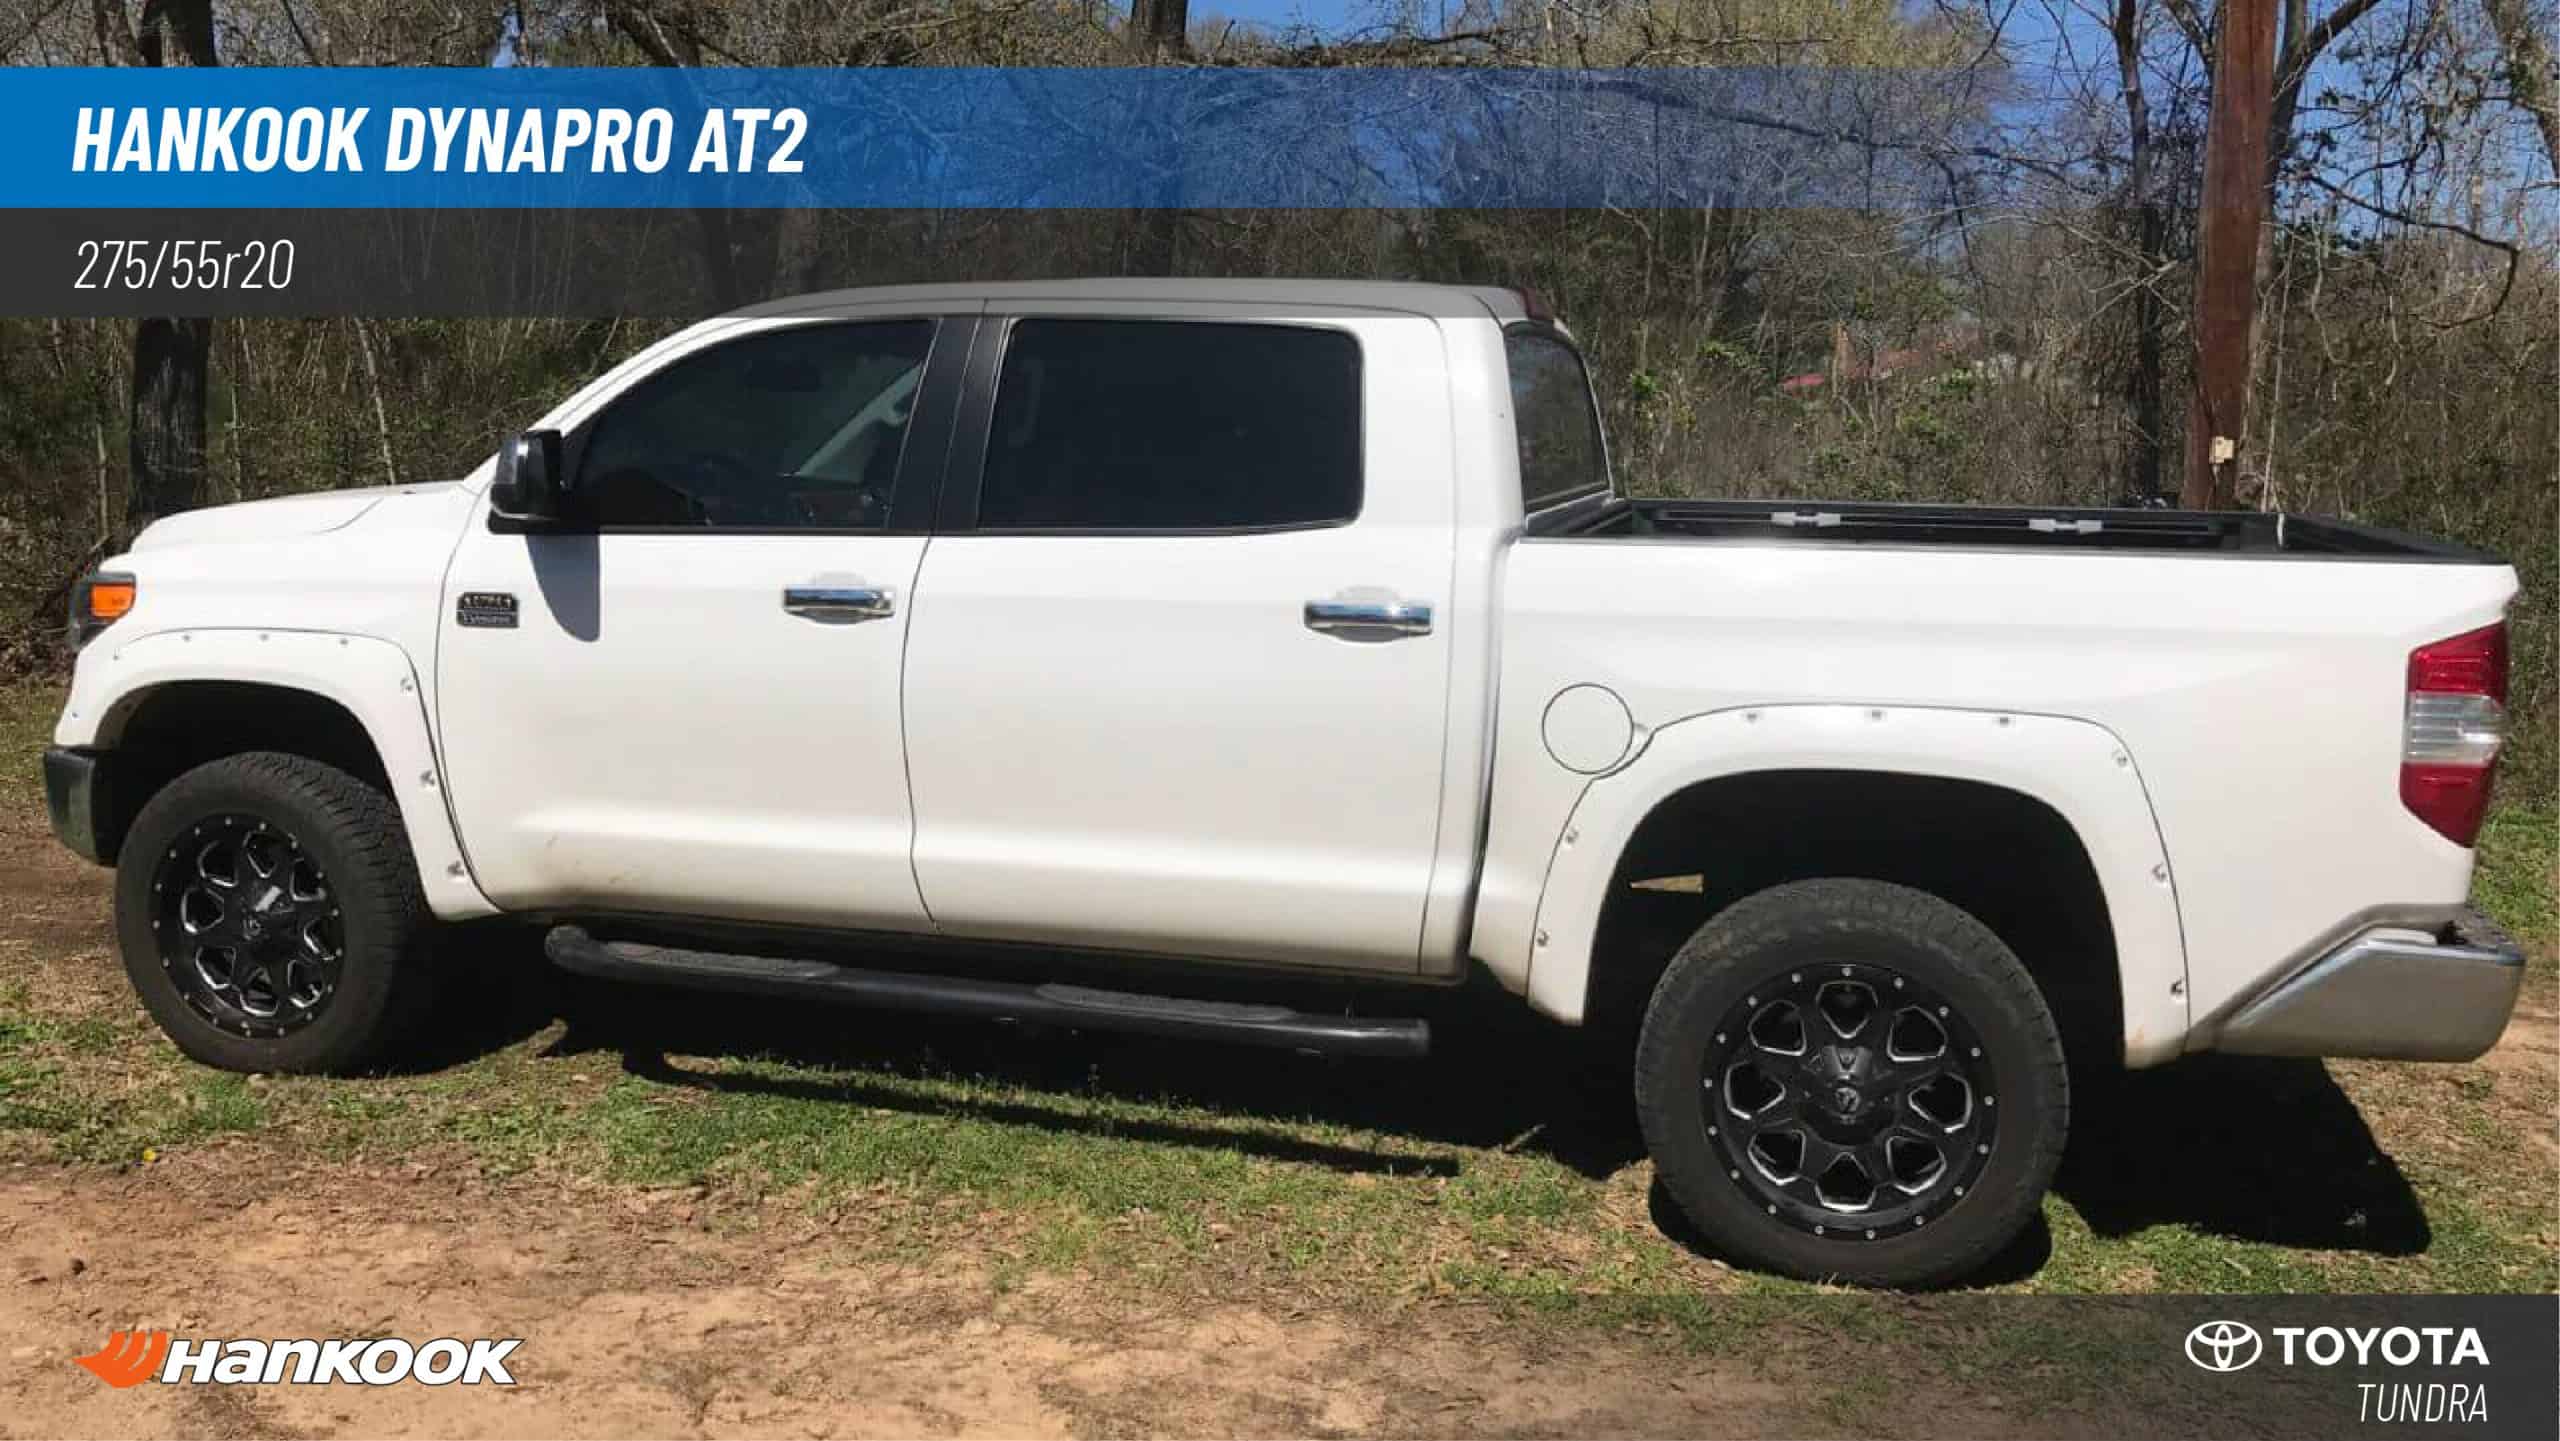 275/55R20 Toyota Tundra with Hankook Dynapro AT2